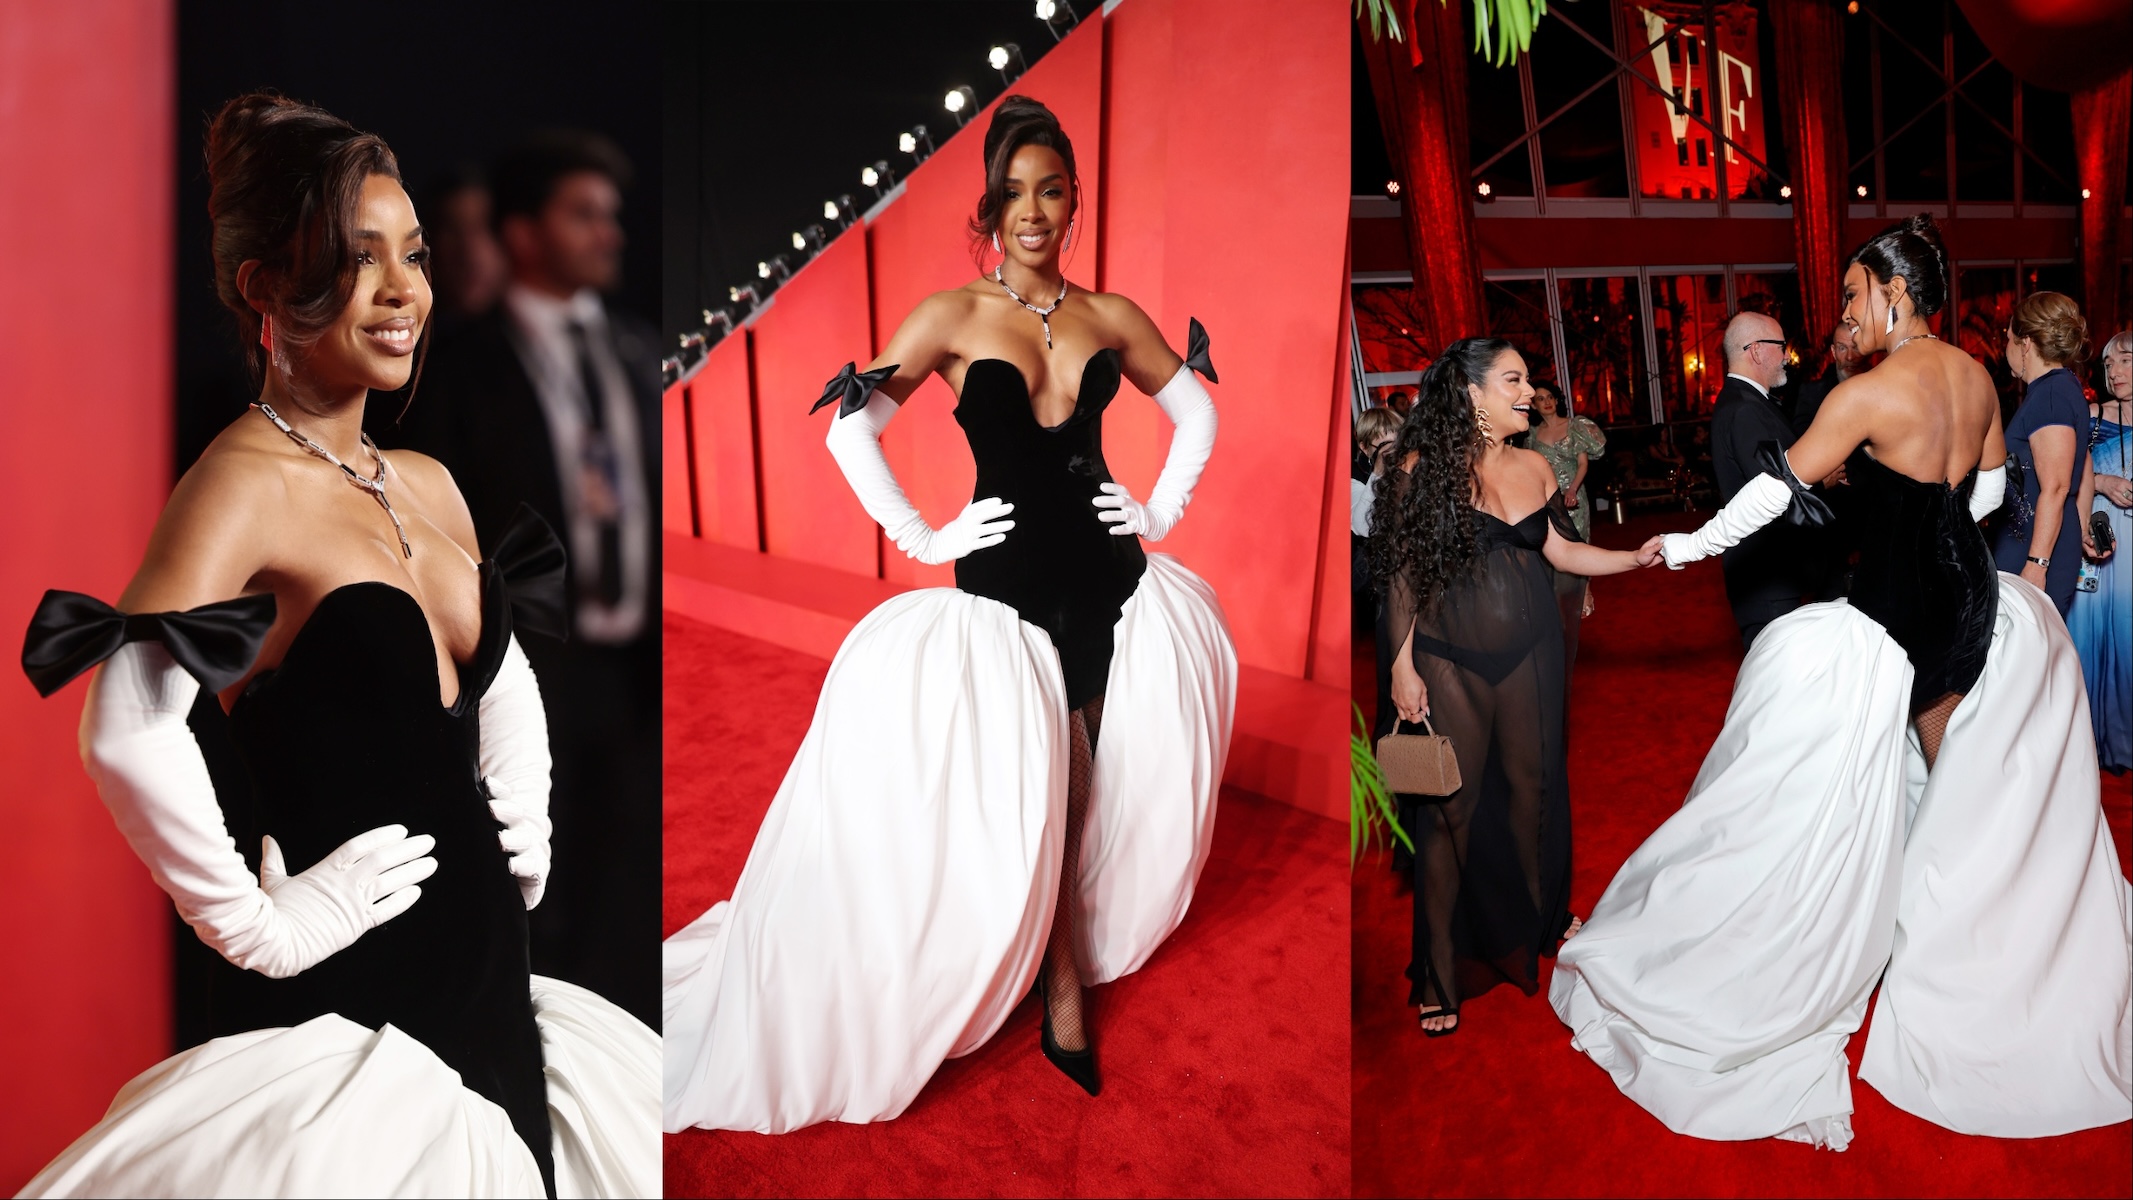 Singer Kelly Rowland wears a black and white gown and poses on the red carpet before the Vanity Fair Oscars party